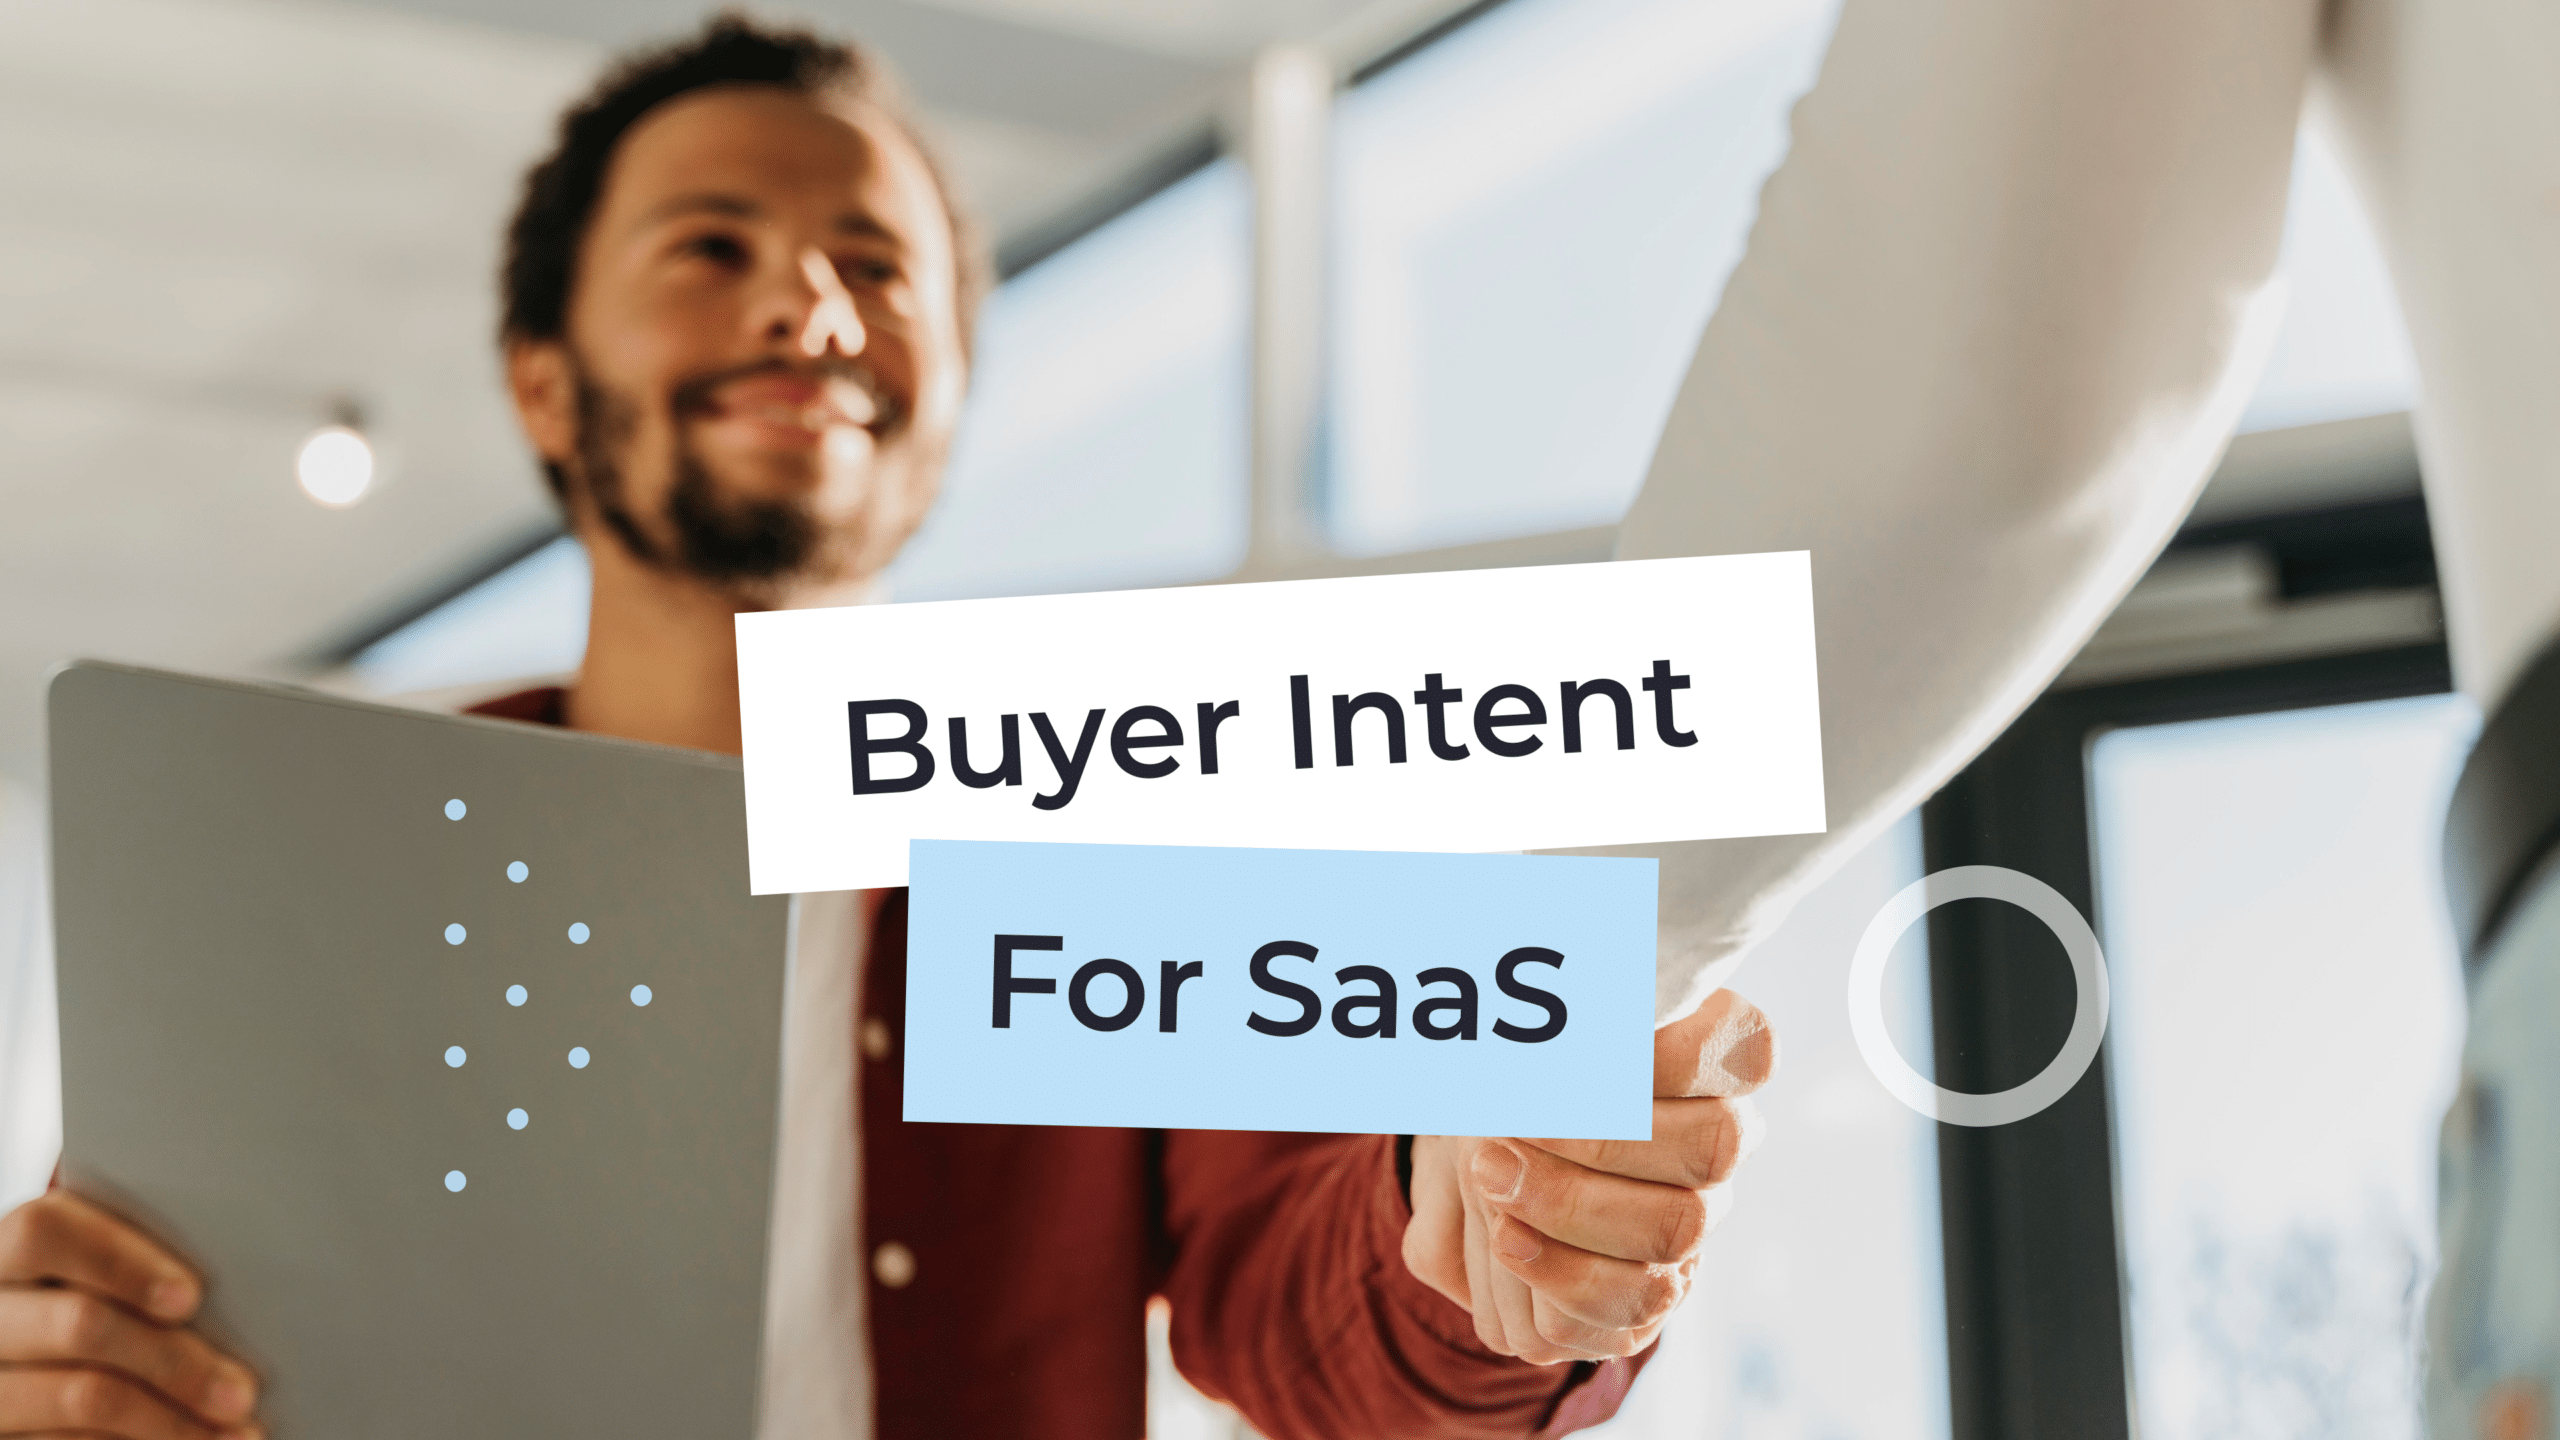 How to Determine Buyer Intent For Your SaaS Products